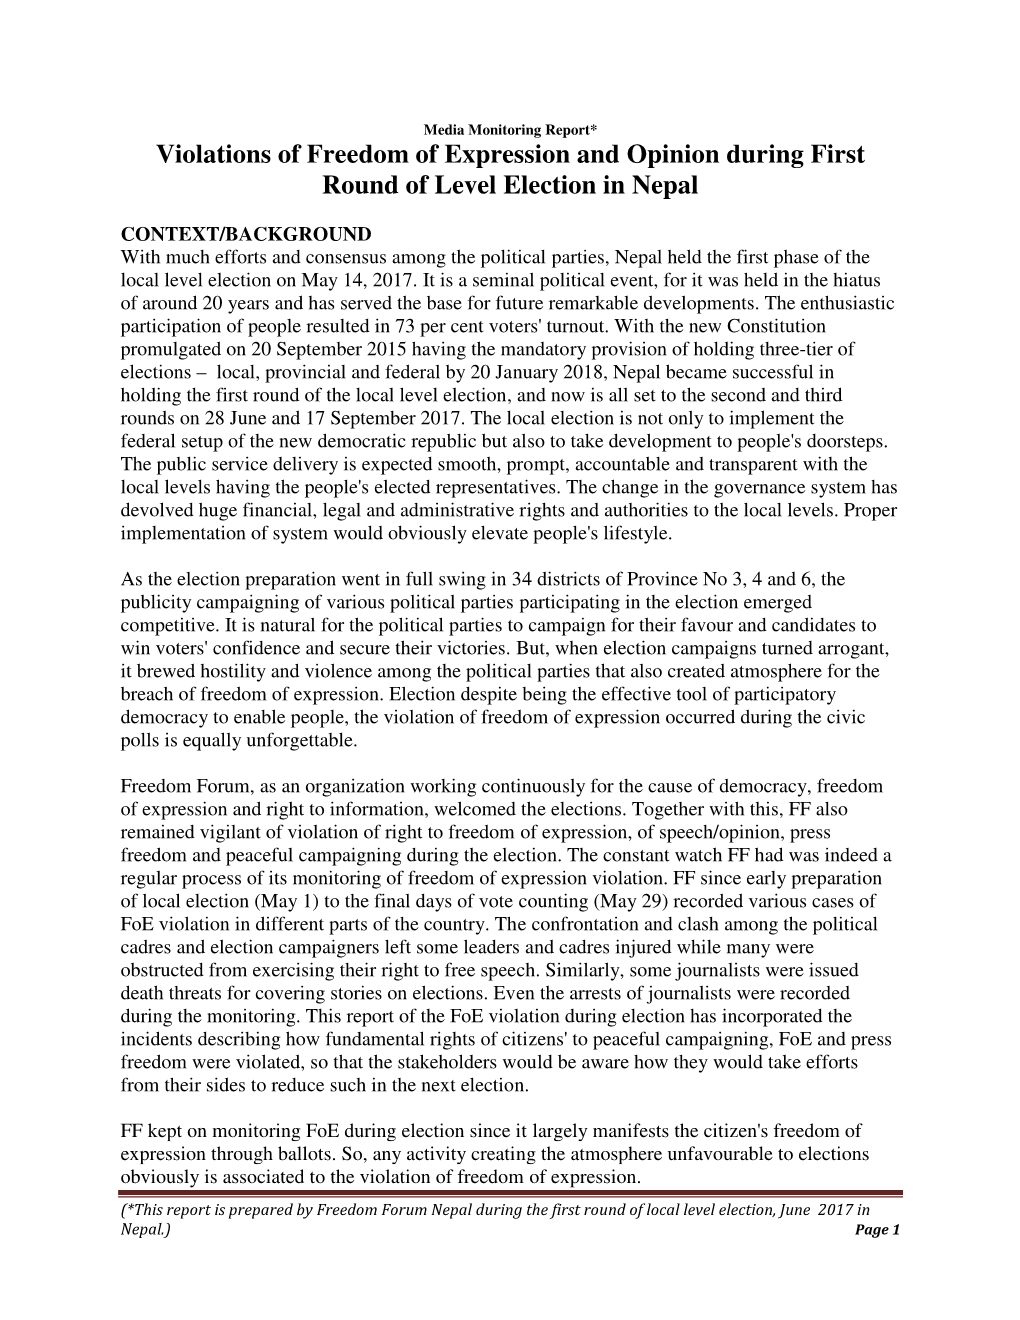 Violations of Freedom of Expression and Opinion During First Round of Level Election in Nepal